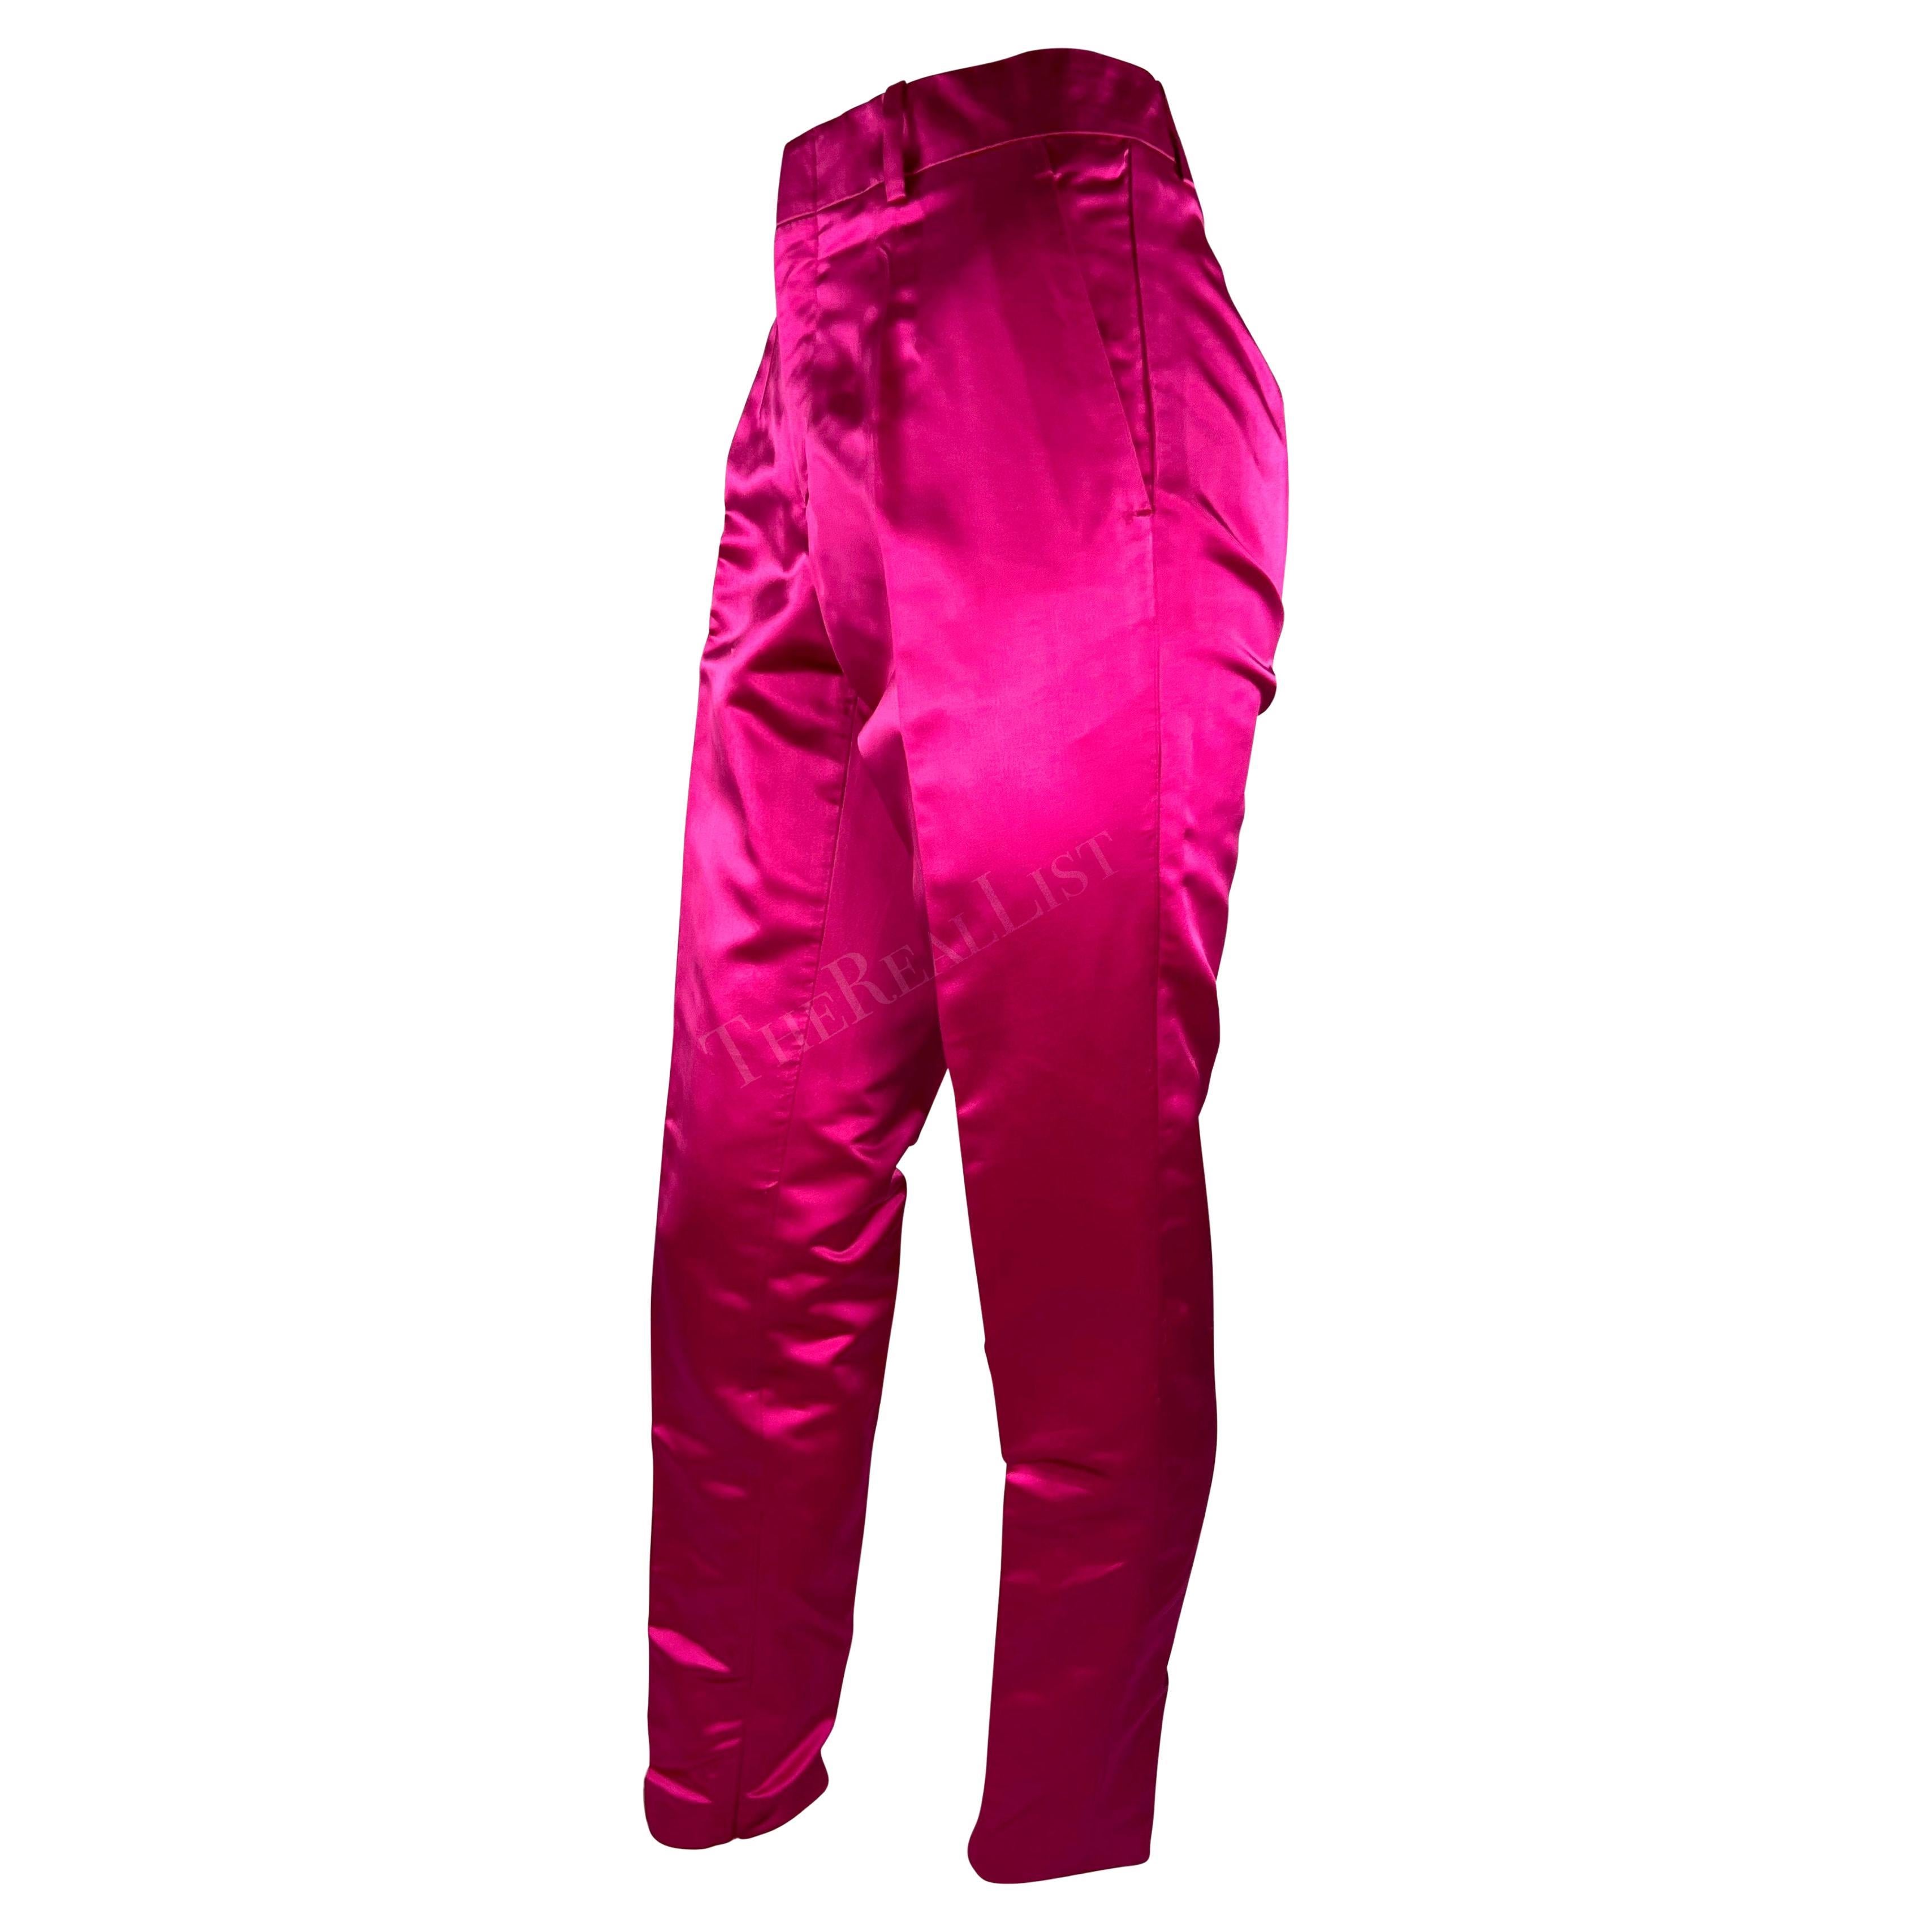 S/S 2001 Gucci by Tom Ford Runway Hot Pink Satin Silk Blend Tapered Pants For Sale 1